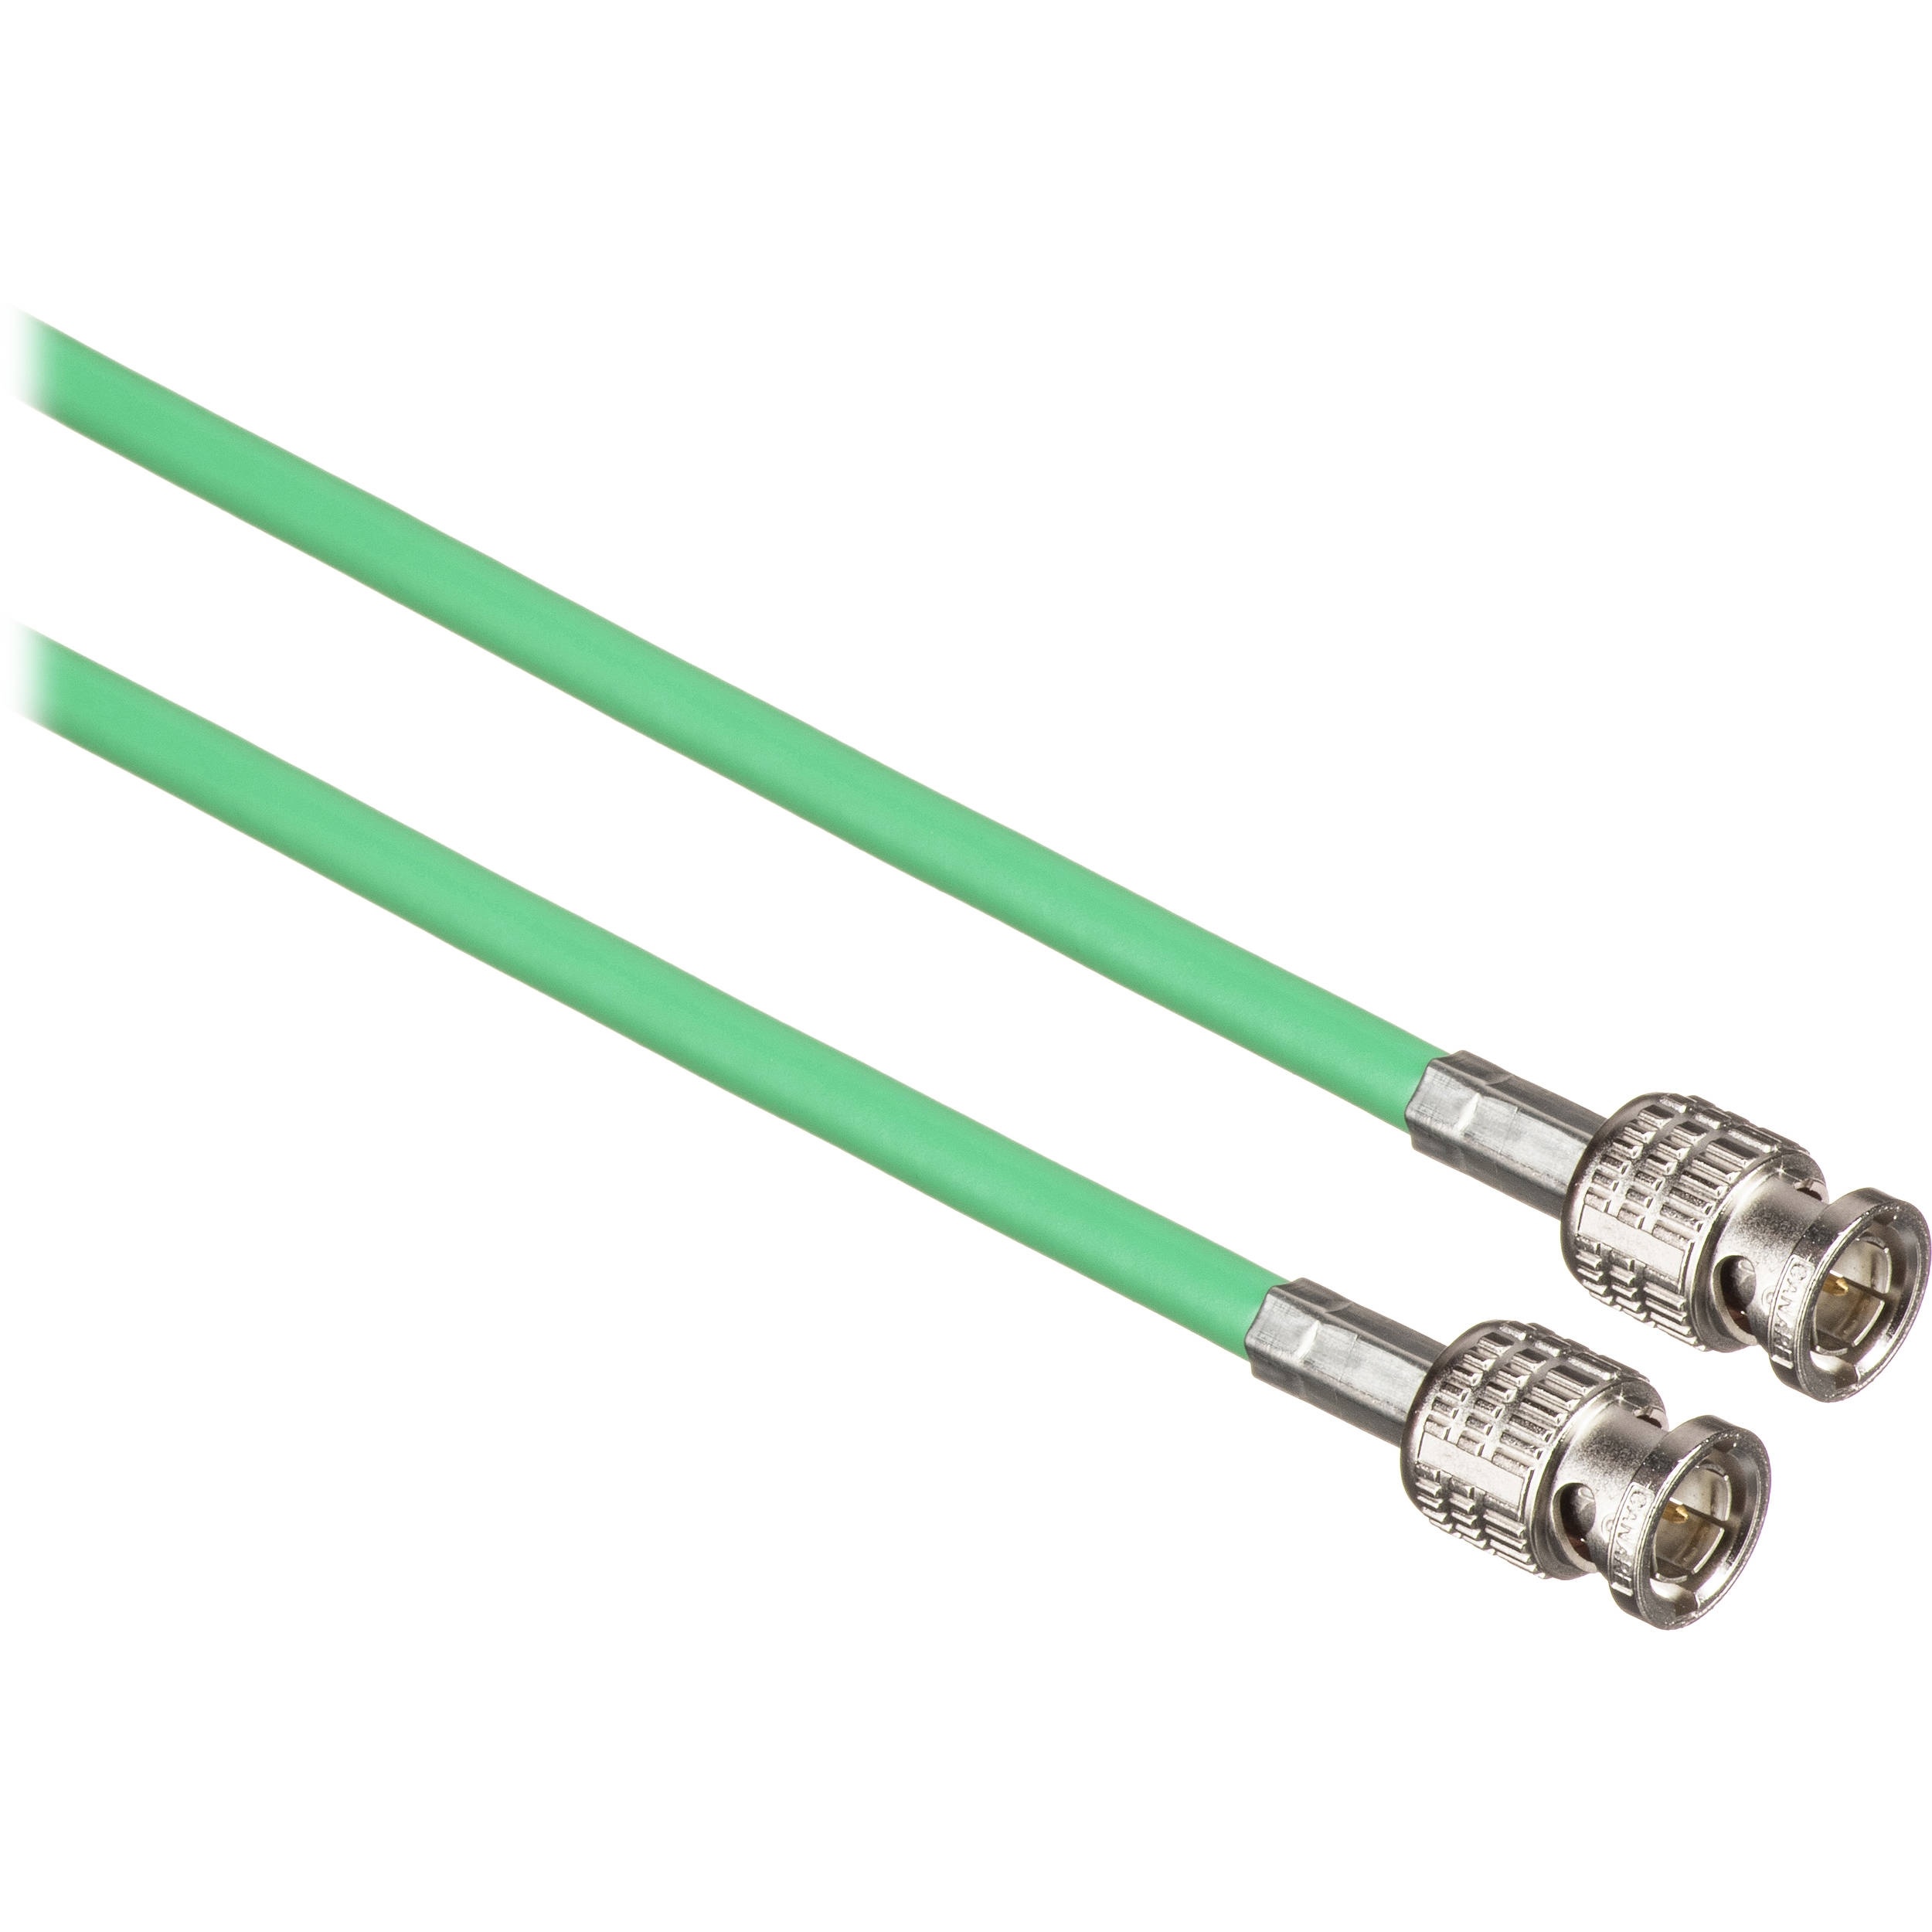 Canare 6 ft HD-SDI Video Coaxial Cable (Green)